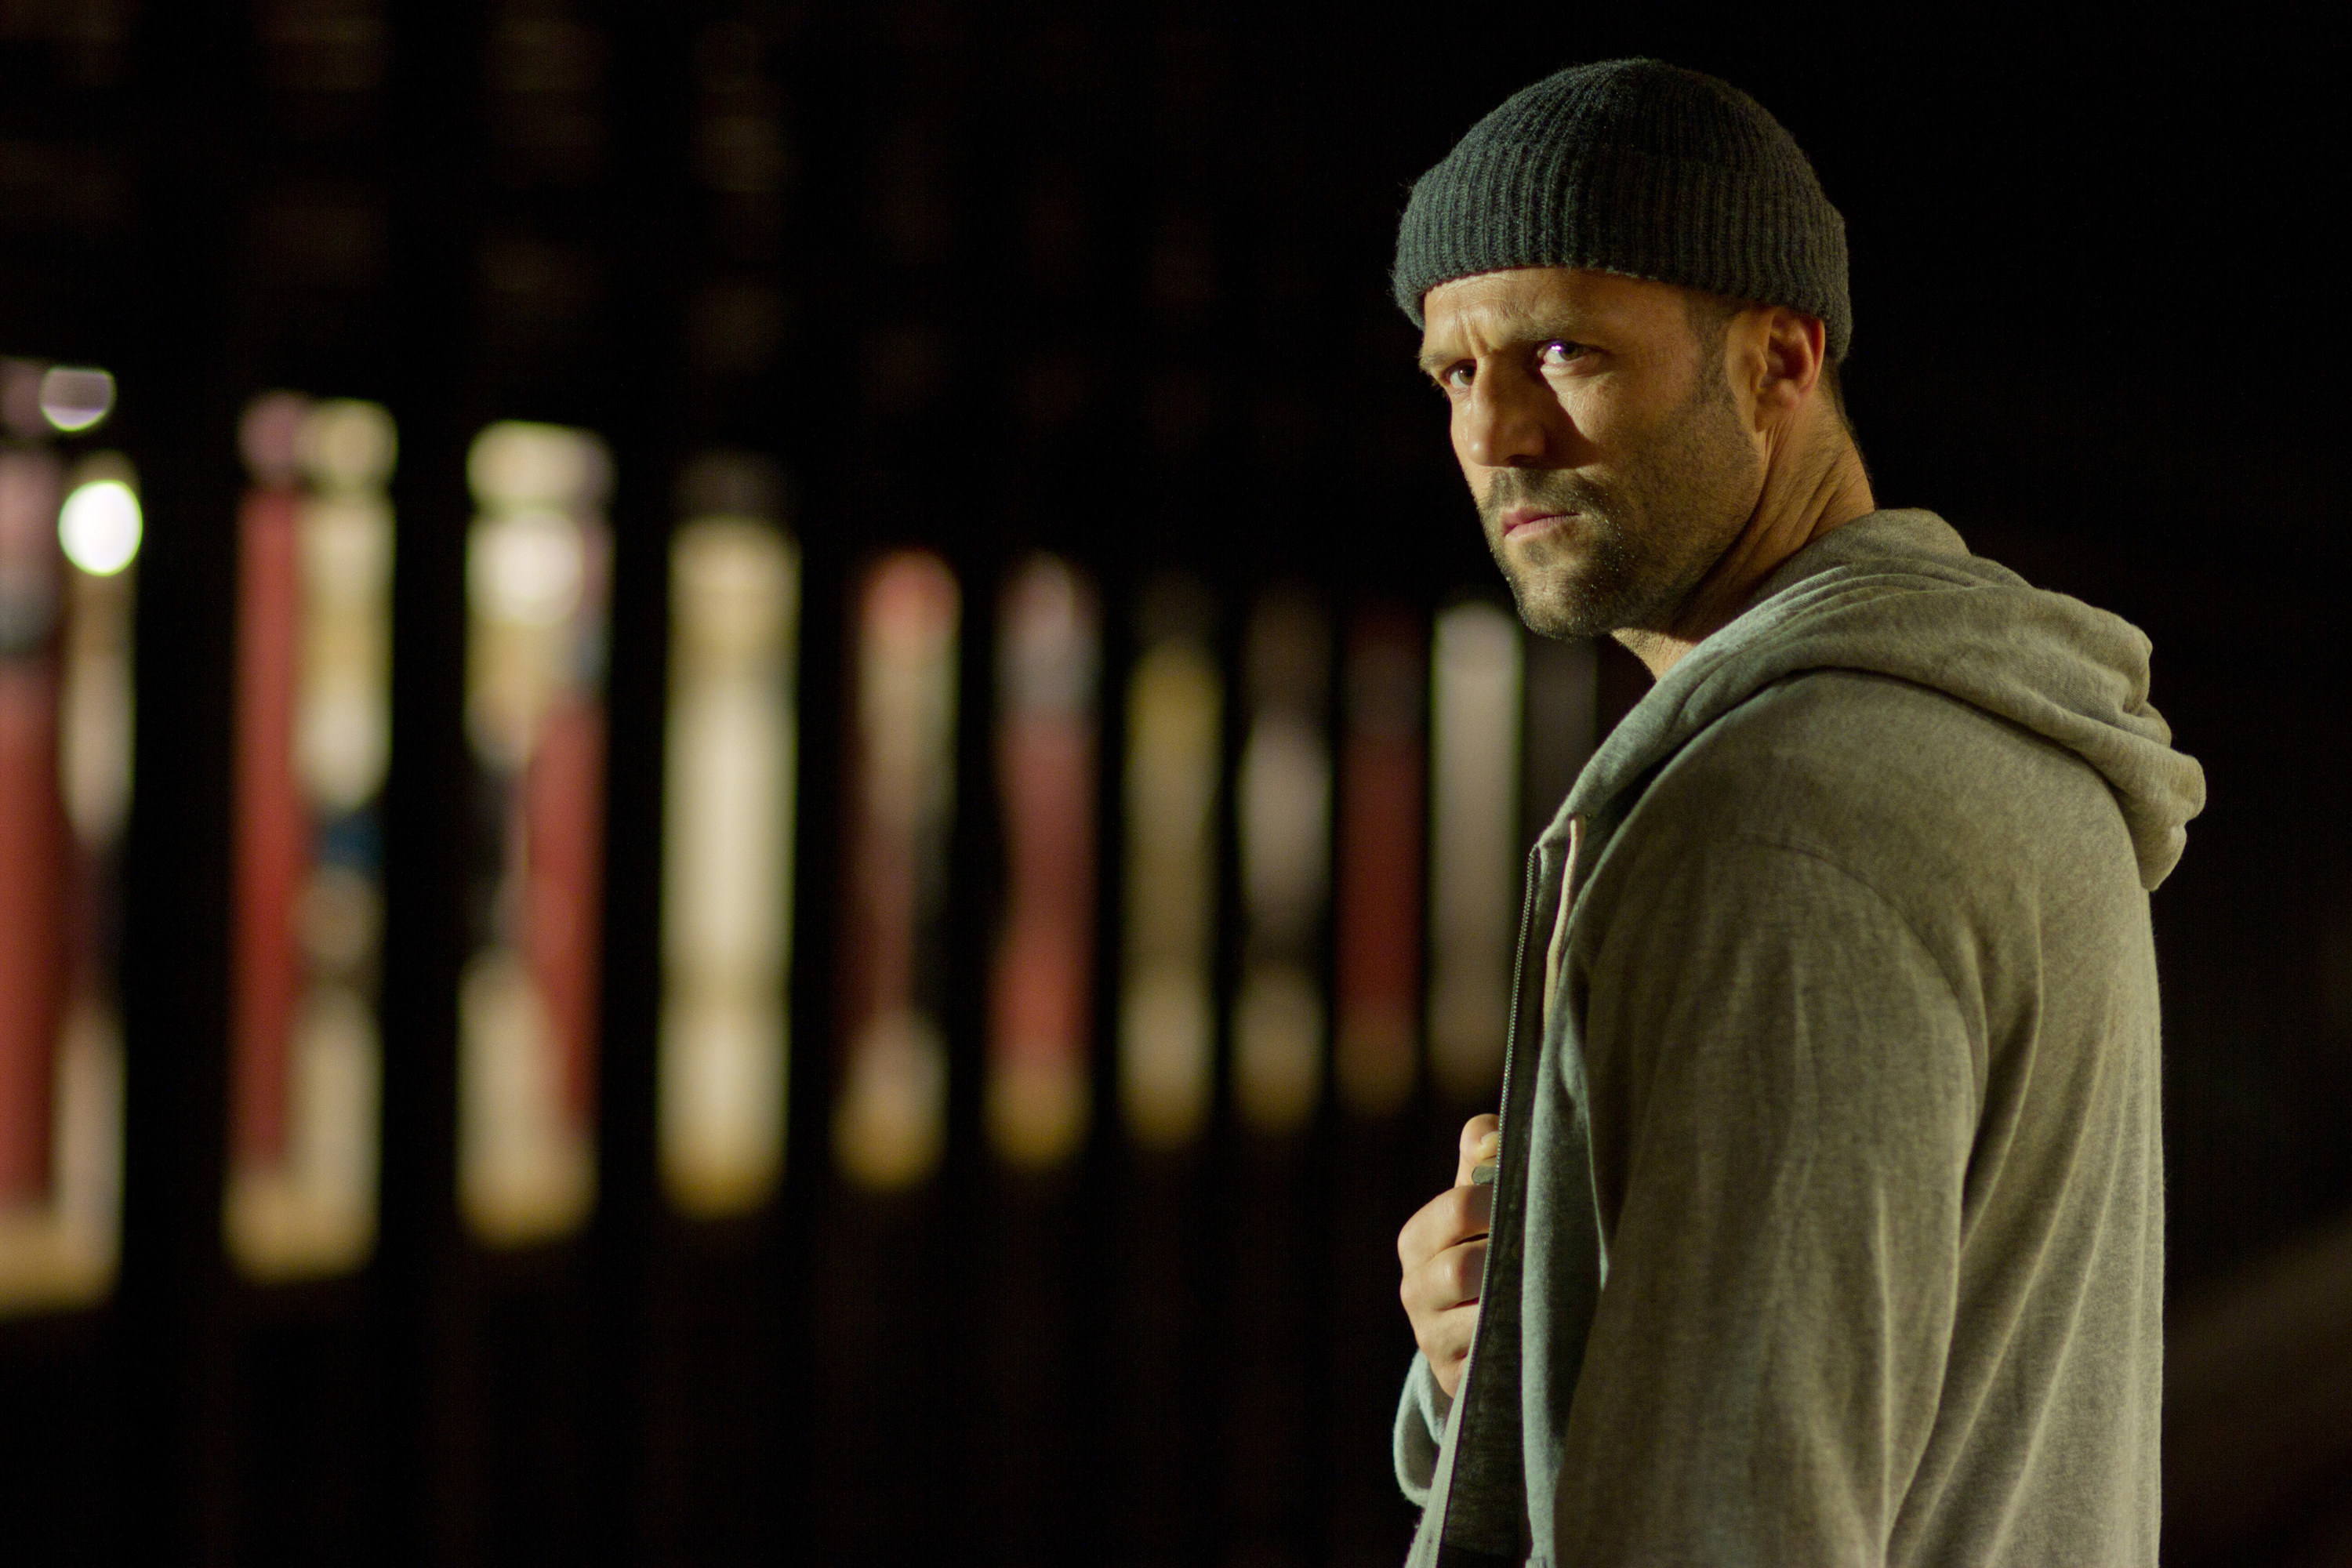 Jason Statham peers towards potential danger in &quot;Safe&quot;